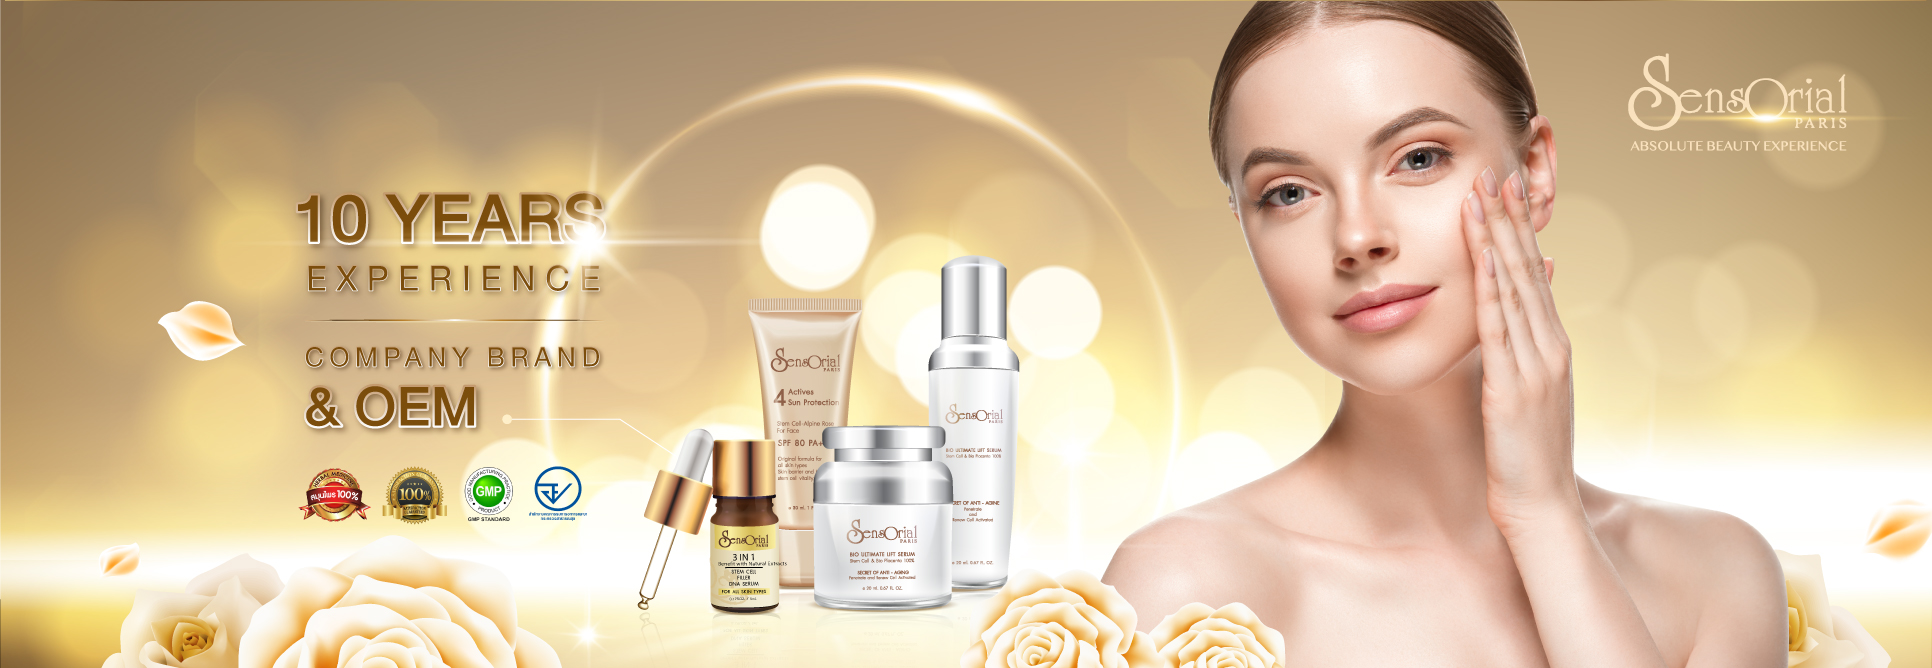 Sens Orial | ABSOLUTE BEAUTY EXPERIENCE